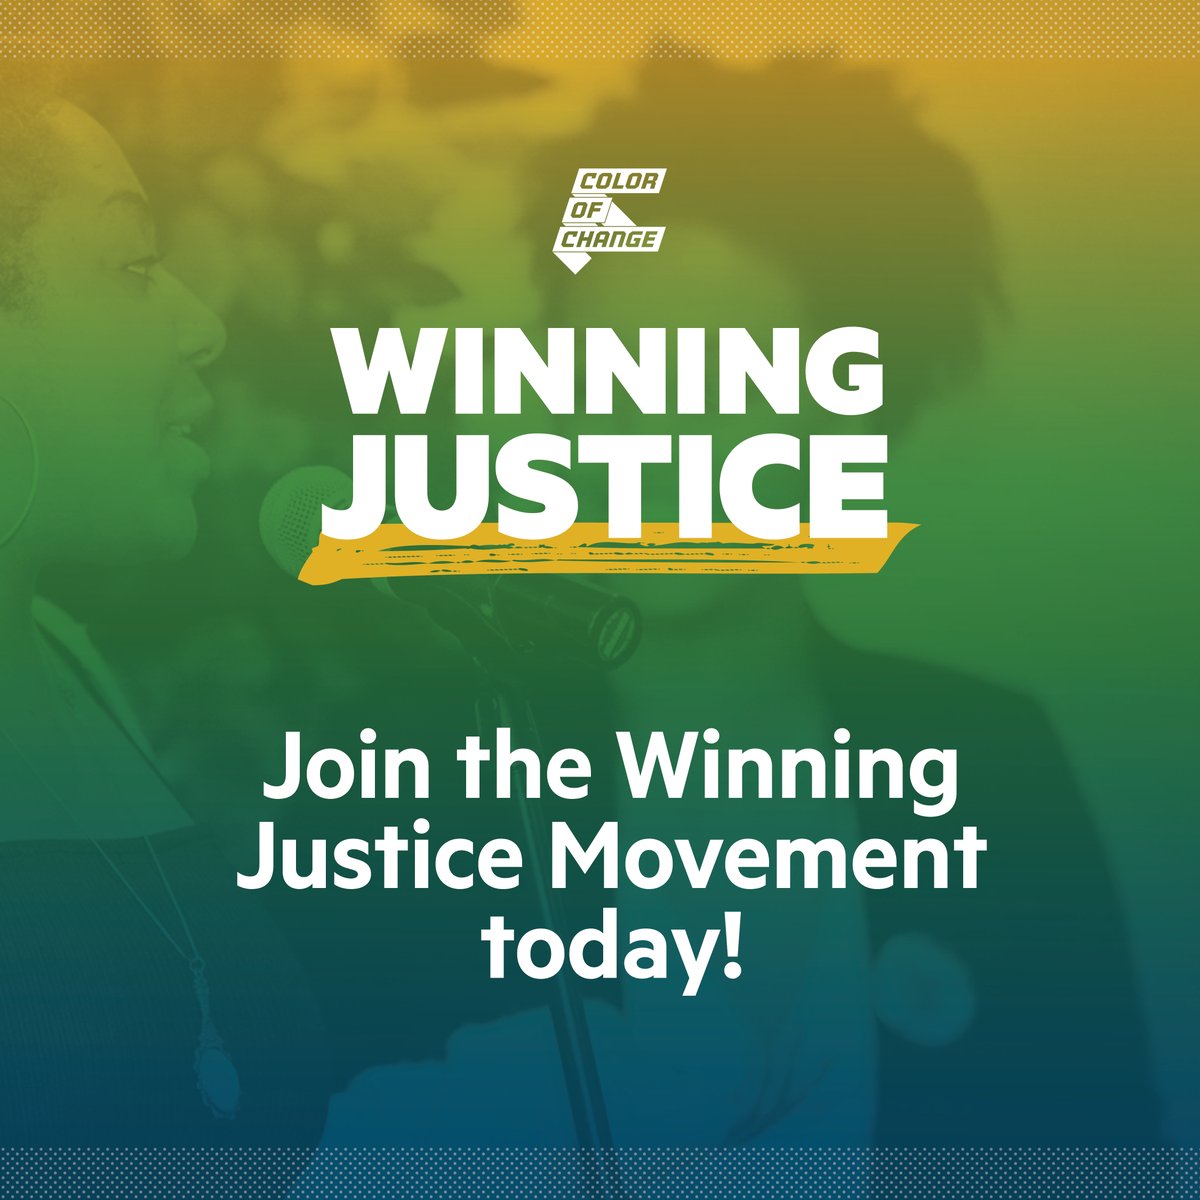 Did you know that you have the power to make prosecutors work for the people they are elected to serve? The #WinningJustice movement is transforming our criminal justice system & building real power for our communities. Learn more and join us! ➡️ winningjustice.org/about